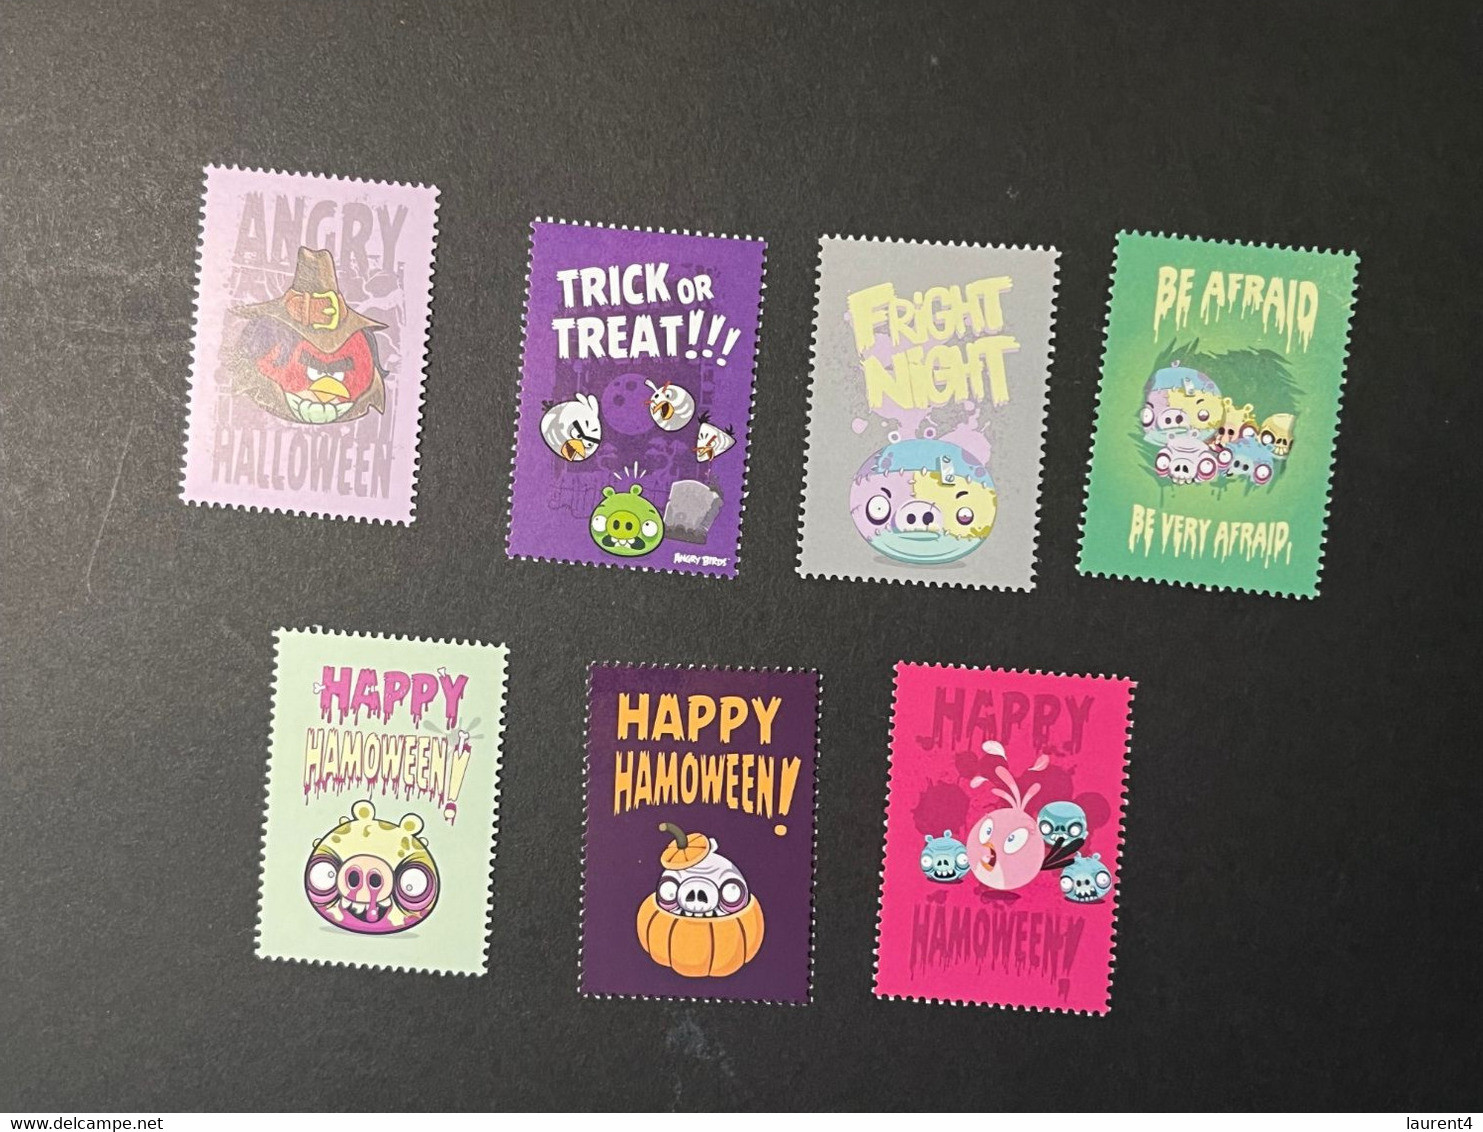 (STAMPS 7-1-2023) Australia - Halloween - ANGRY BIRDS Cinderella (TAG) 7 (mint) As Seen On Scan - Cinderella